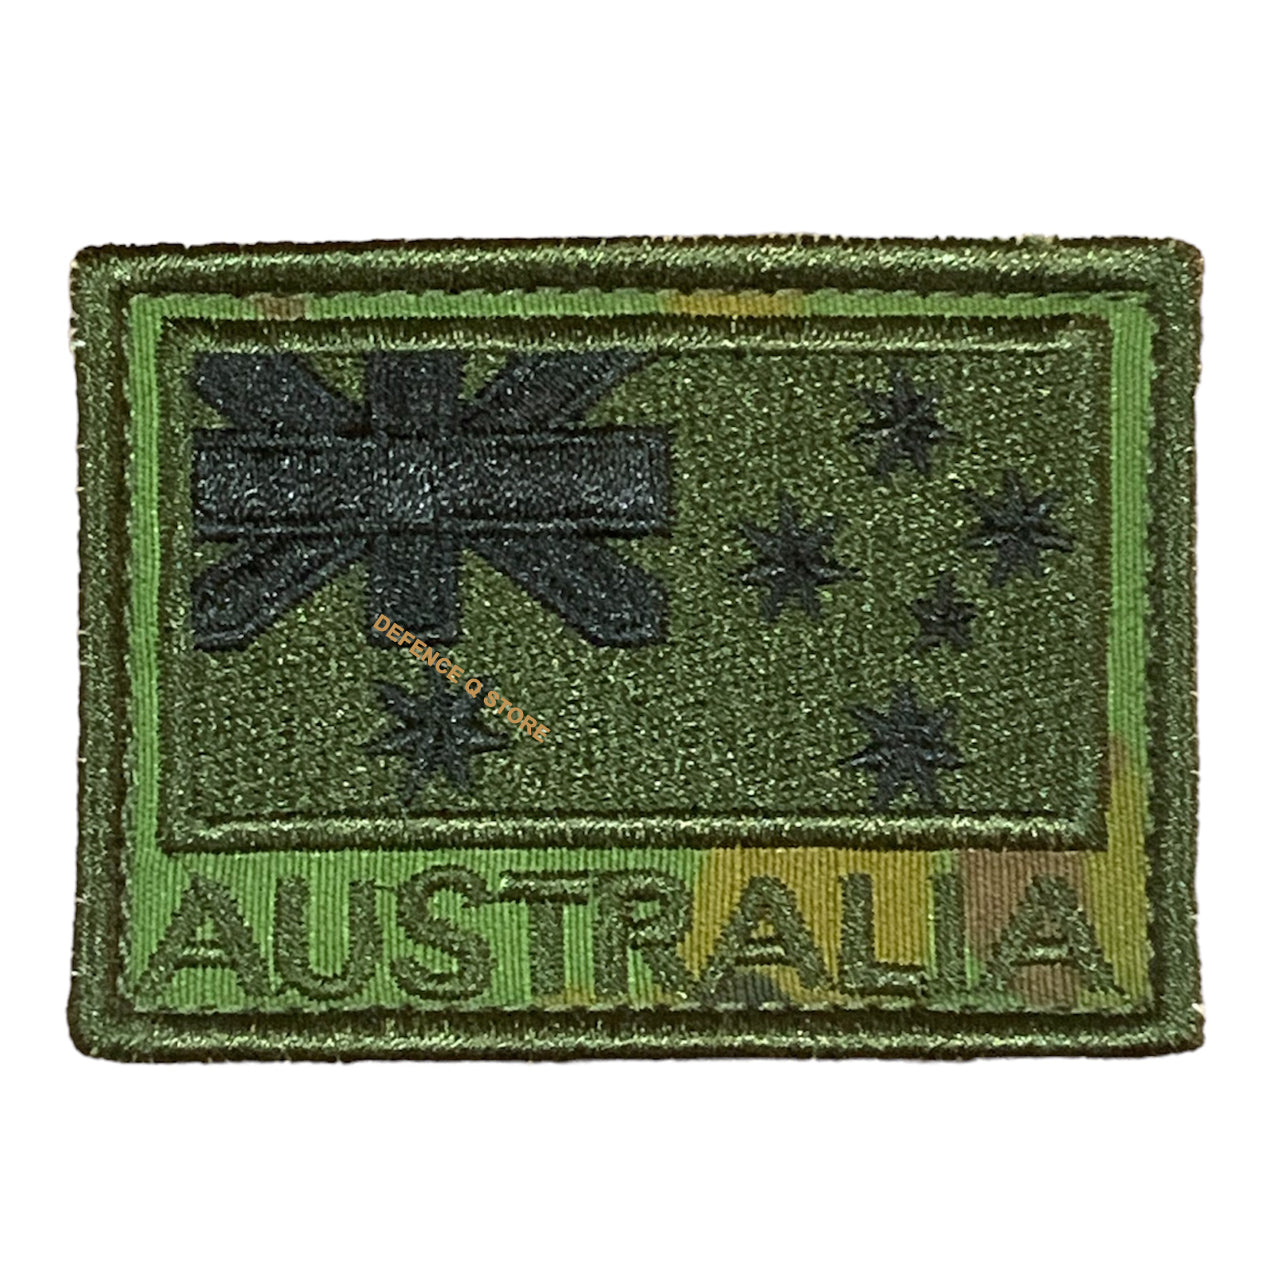 Enhance your outfit with the AMC Subdued ANF Green Embroidery Velcro Backed Patch. Measuring 5cm X 7cm, it adds a charming touch to your jacket, pack, or cap. Display your patriotic spirit in a stylish and compelling manner! www.defenceqstore.com.au